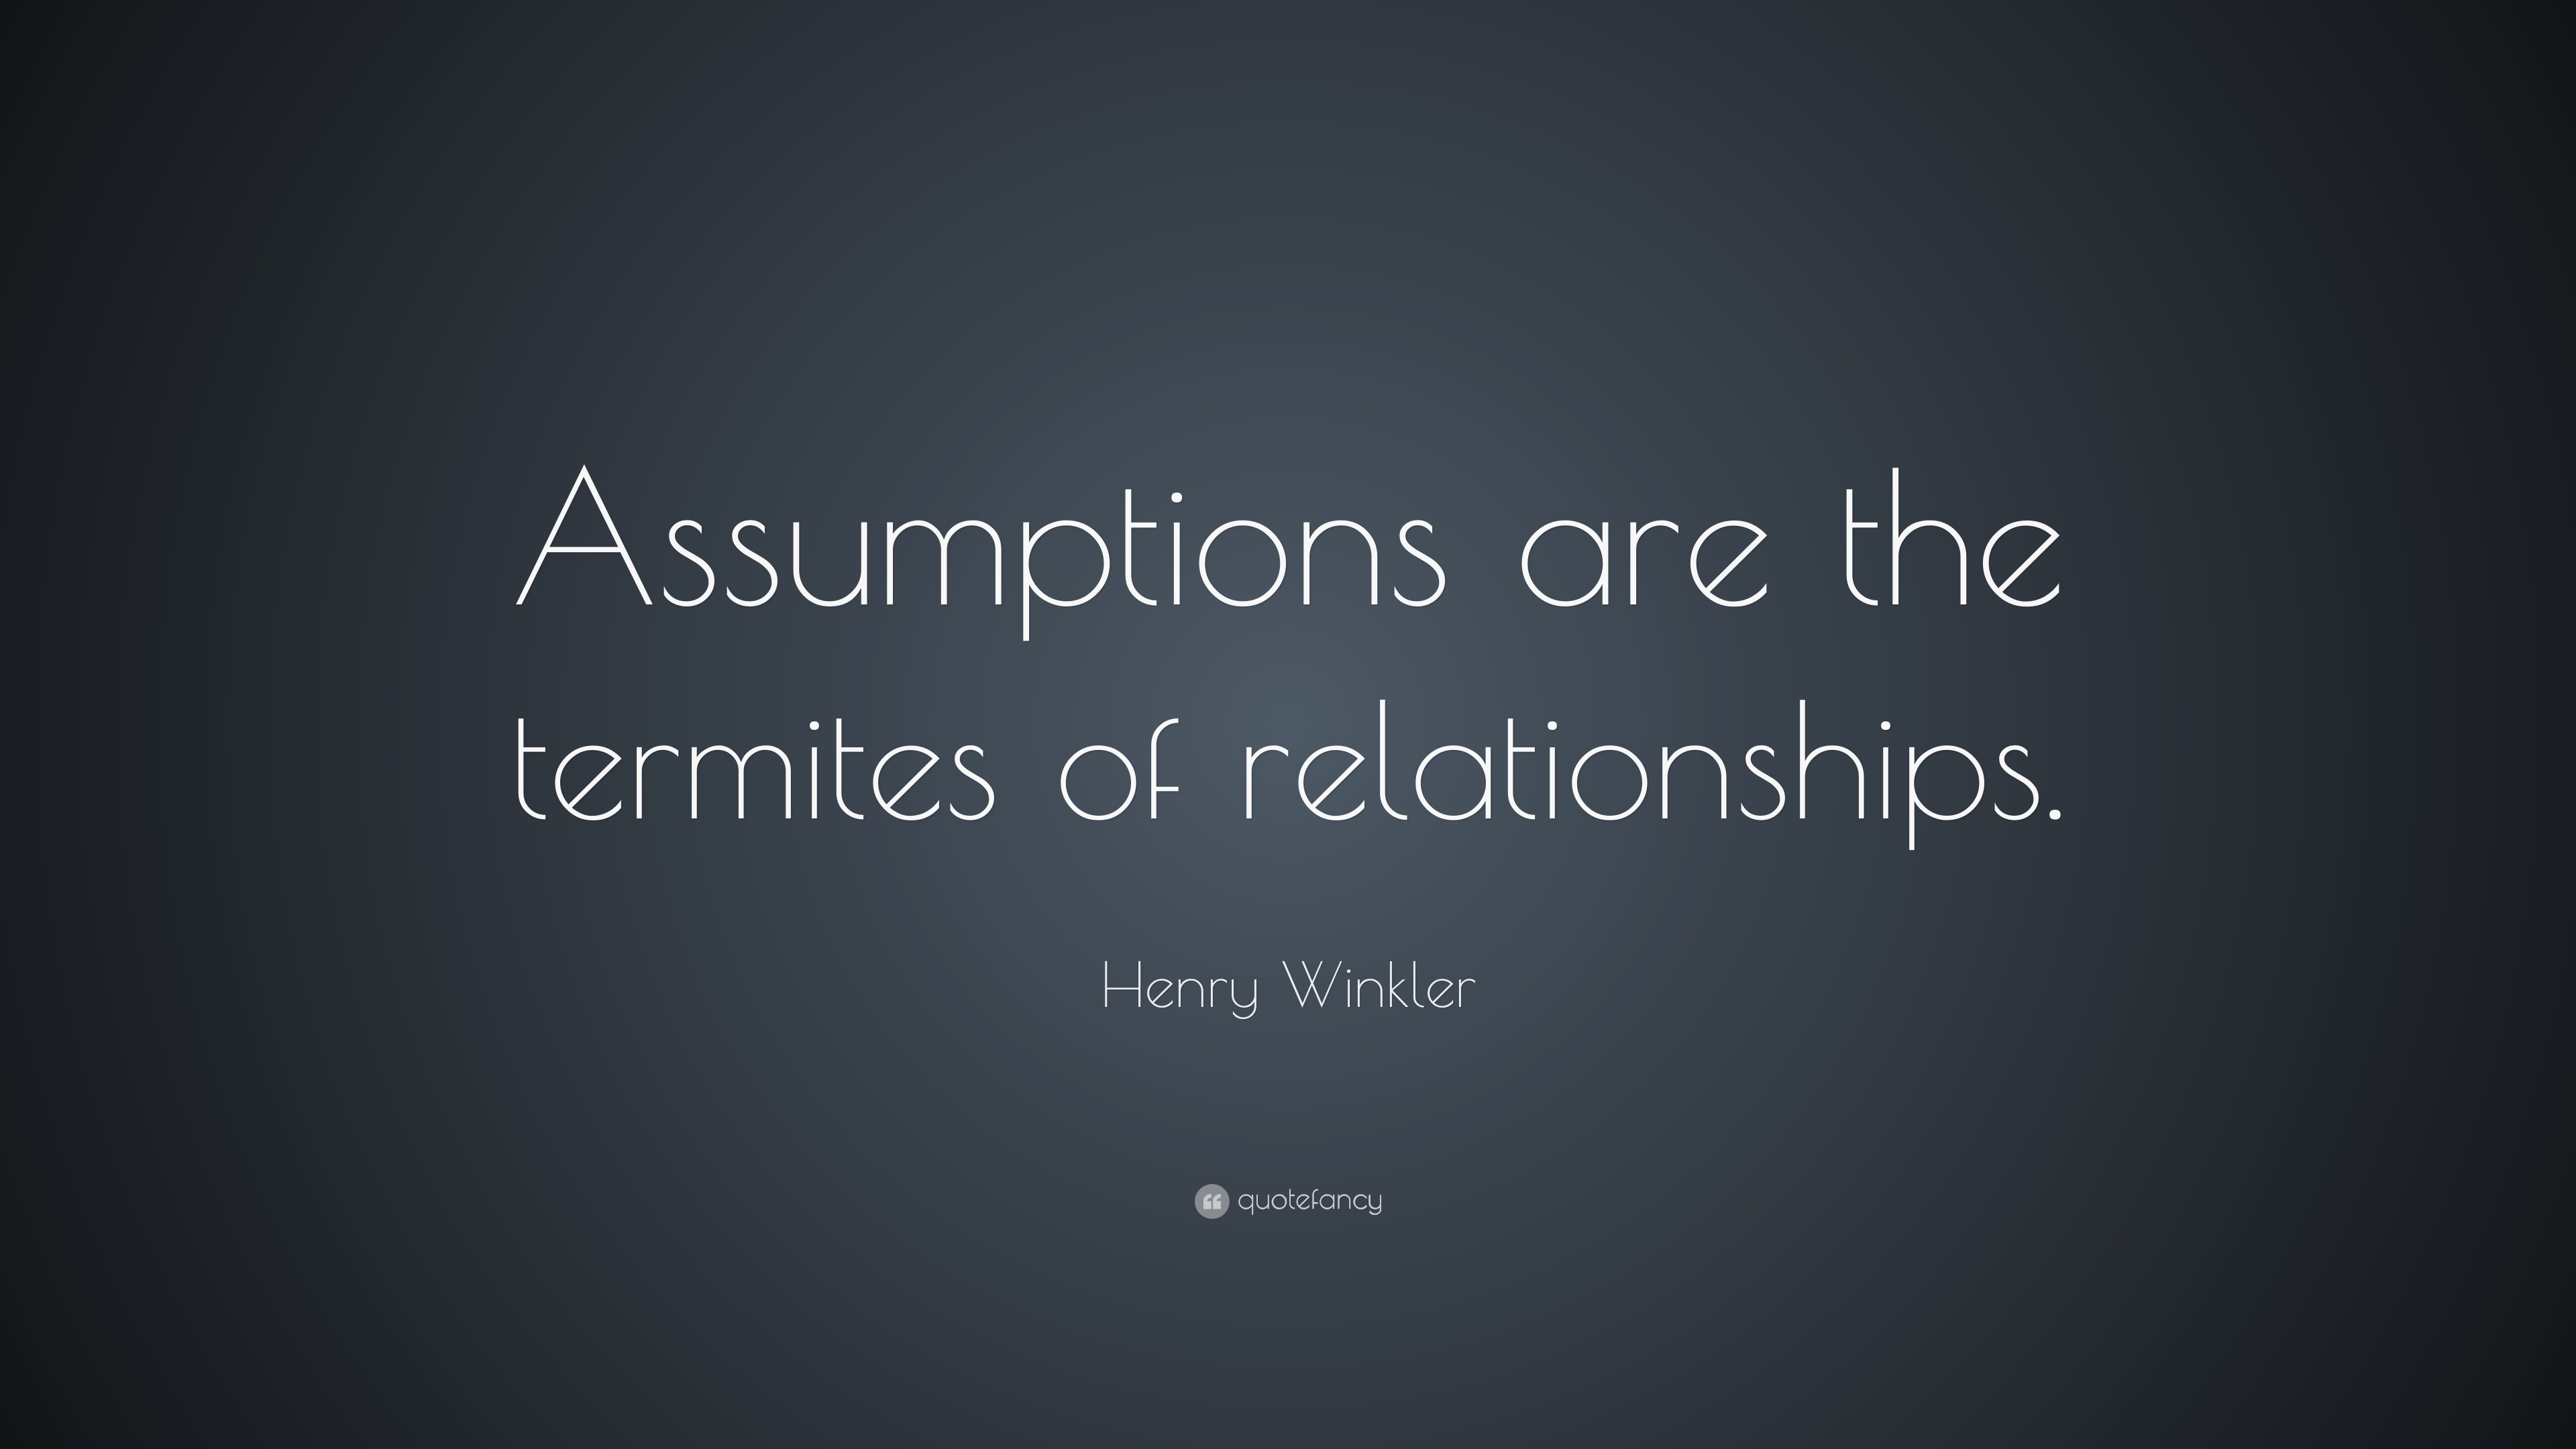 Assumptions are the termites of relationships. Henry Winkler